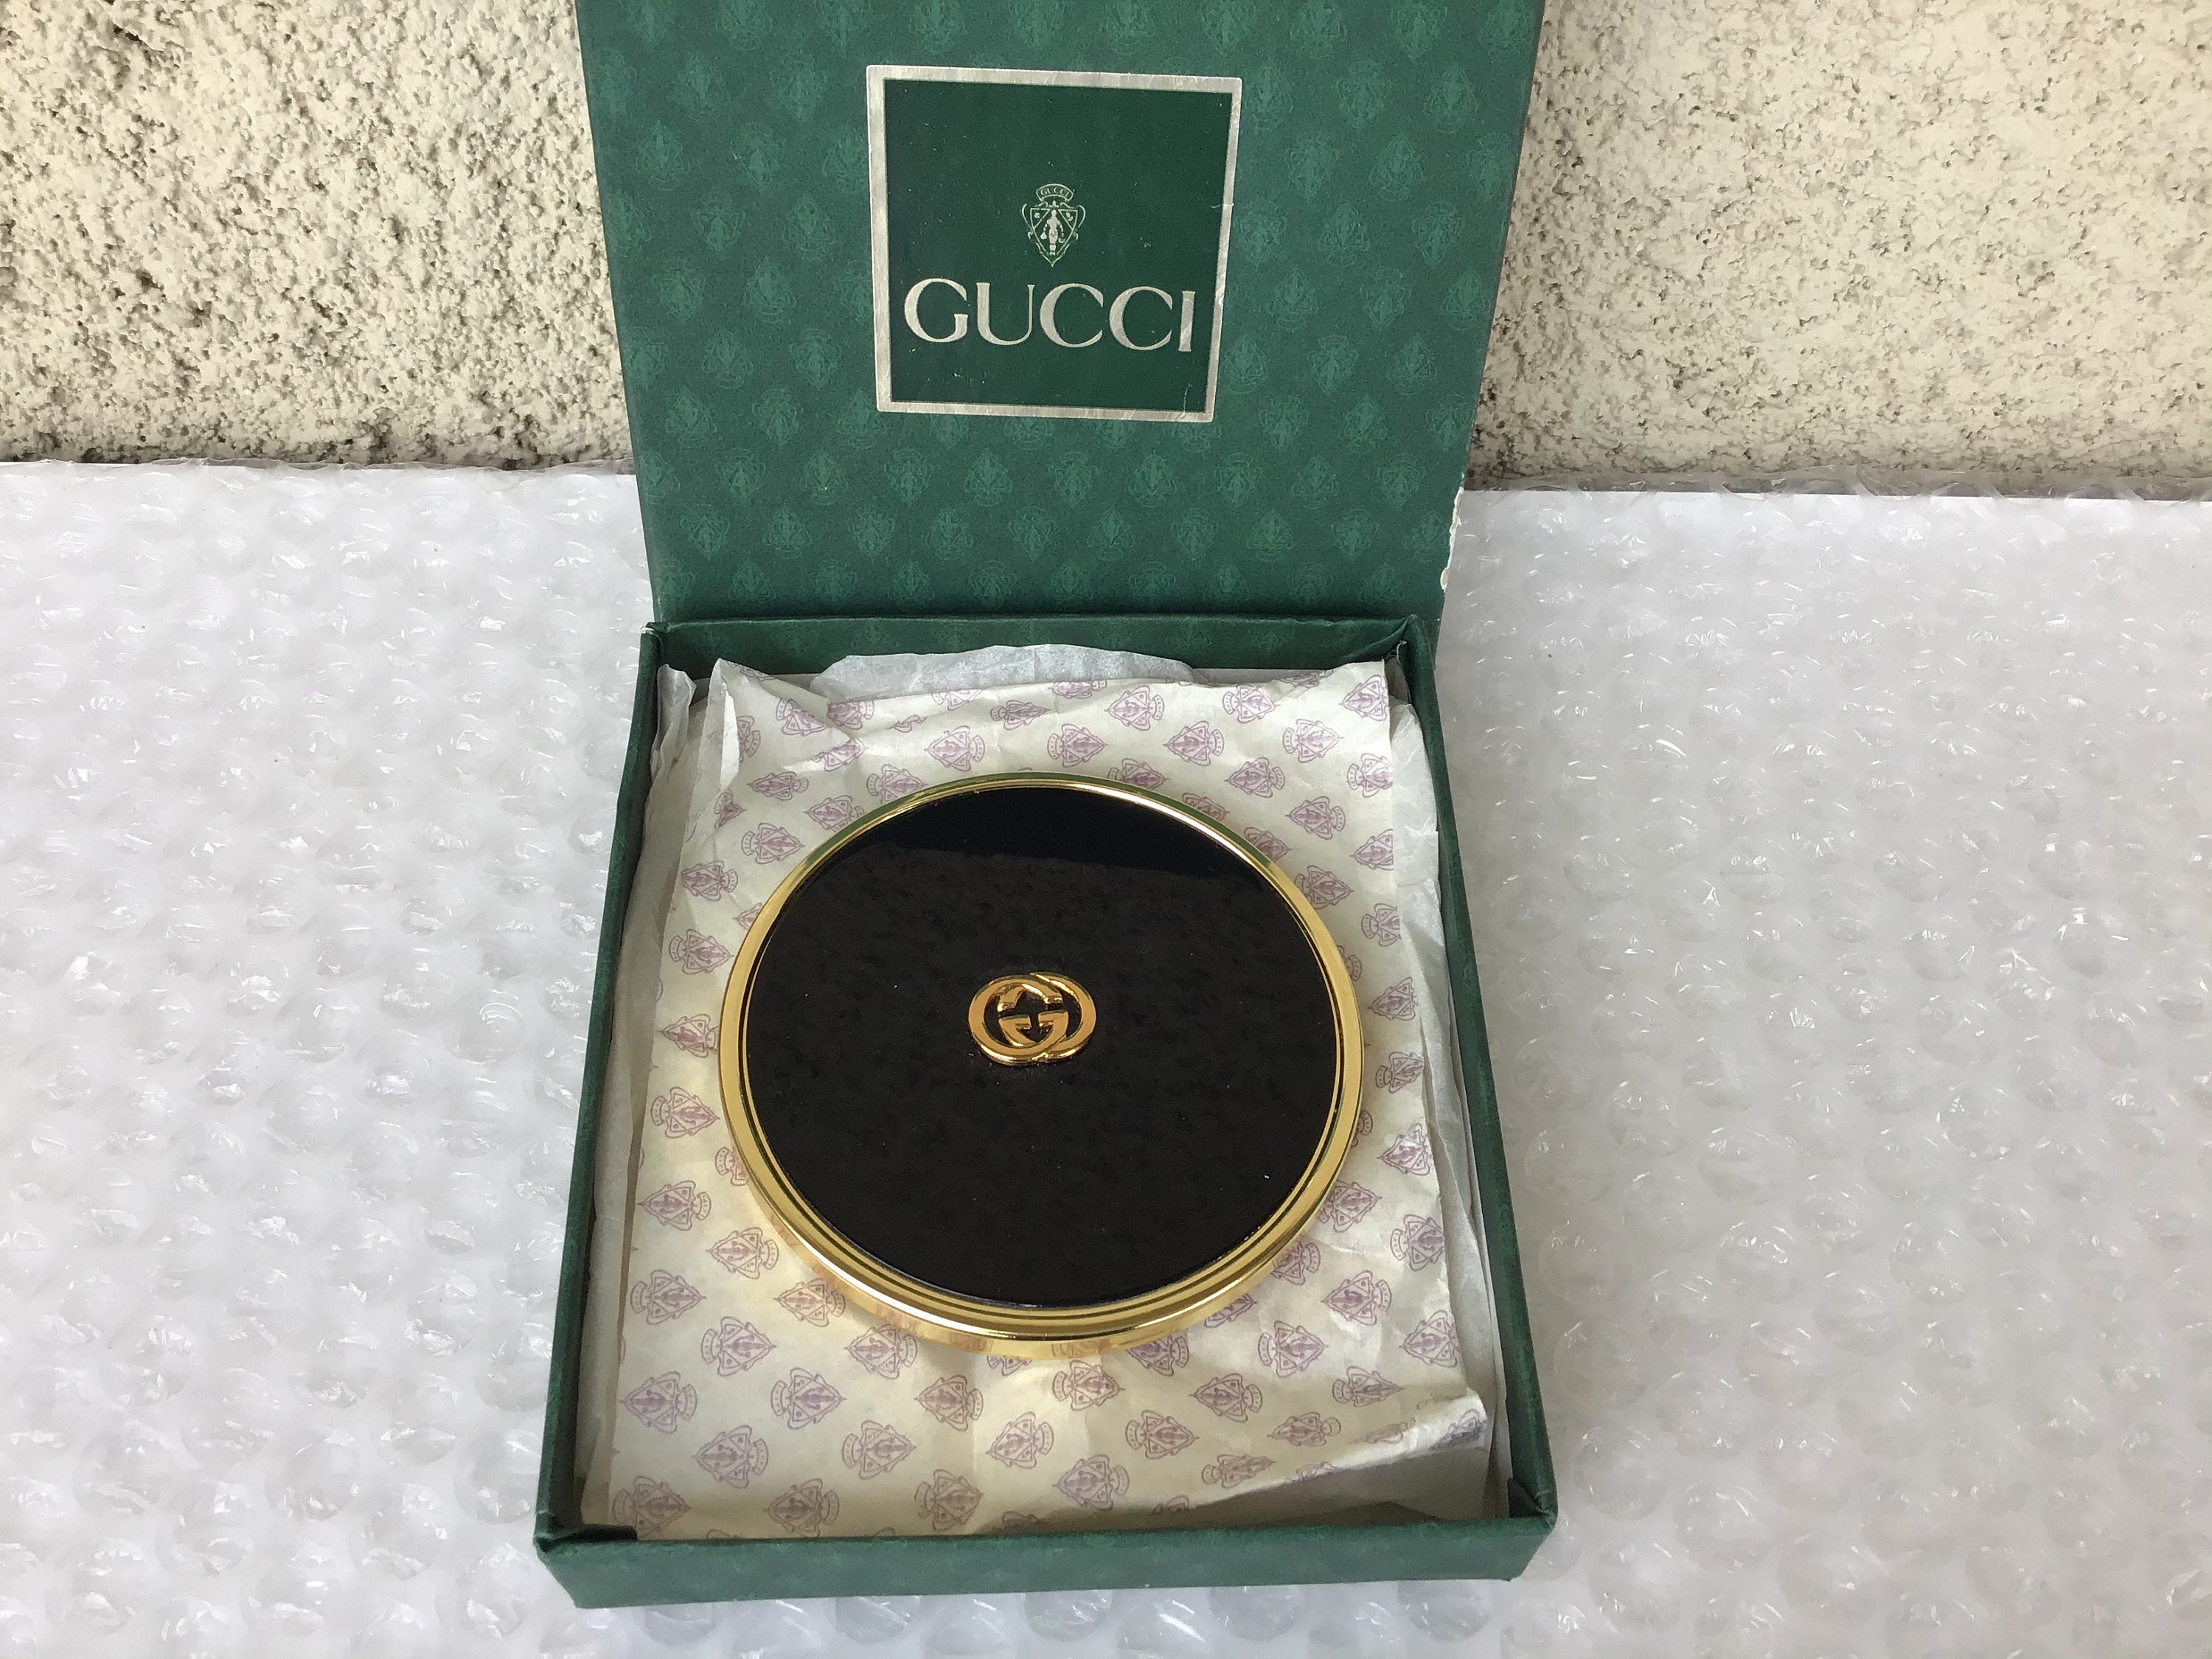 Vintage Gucci Black Enamel GG Mirror Compact Never Used Mint 